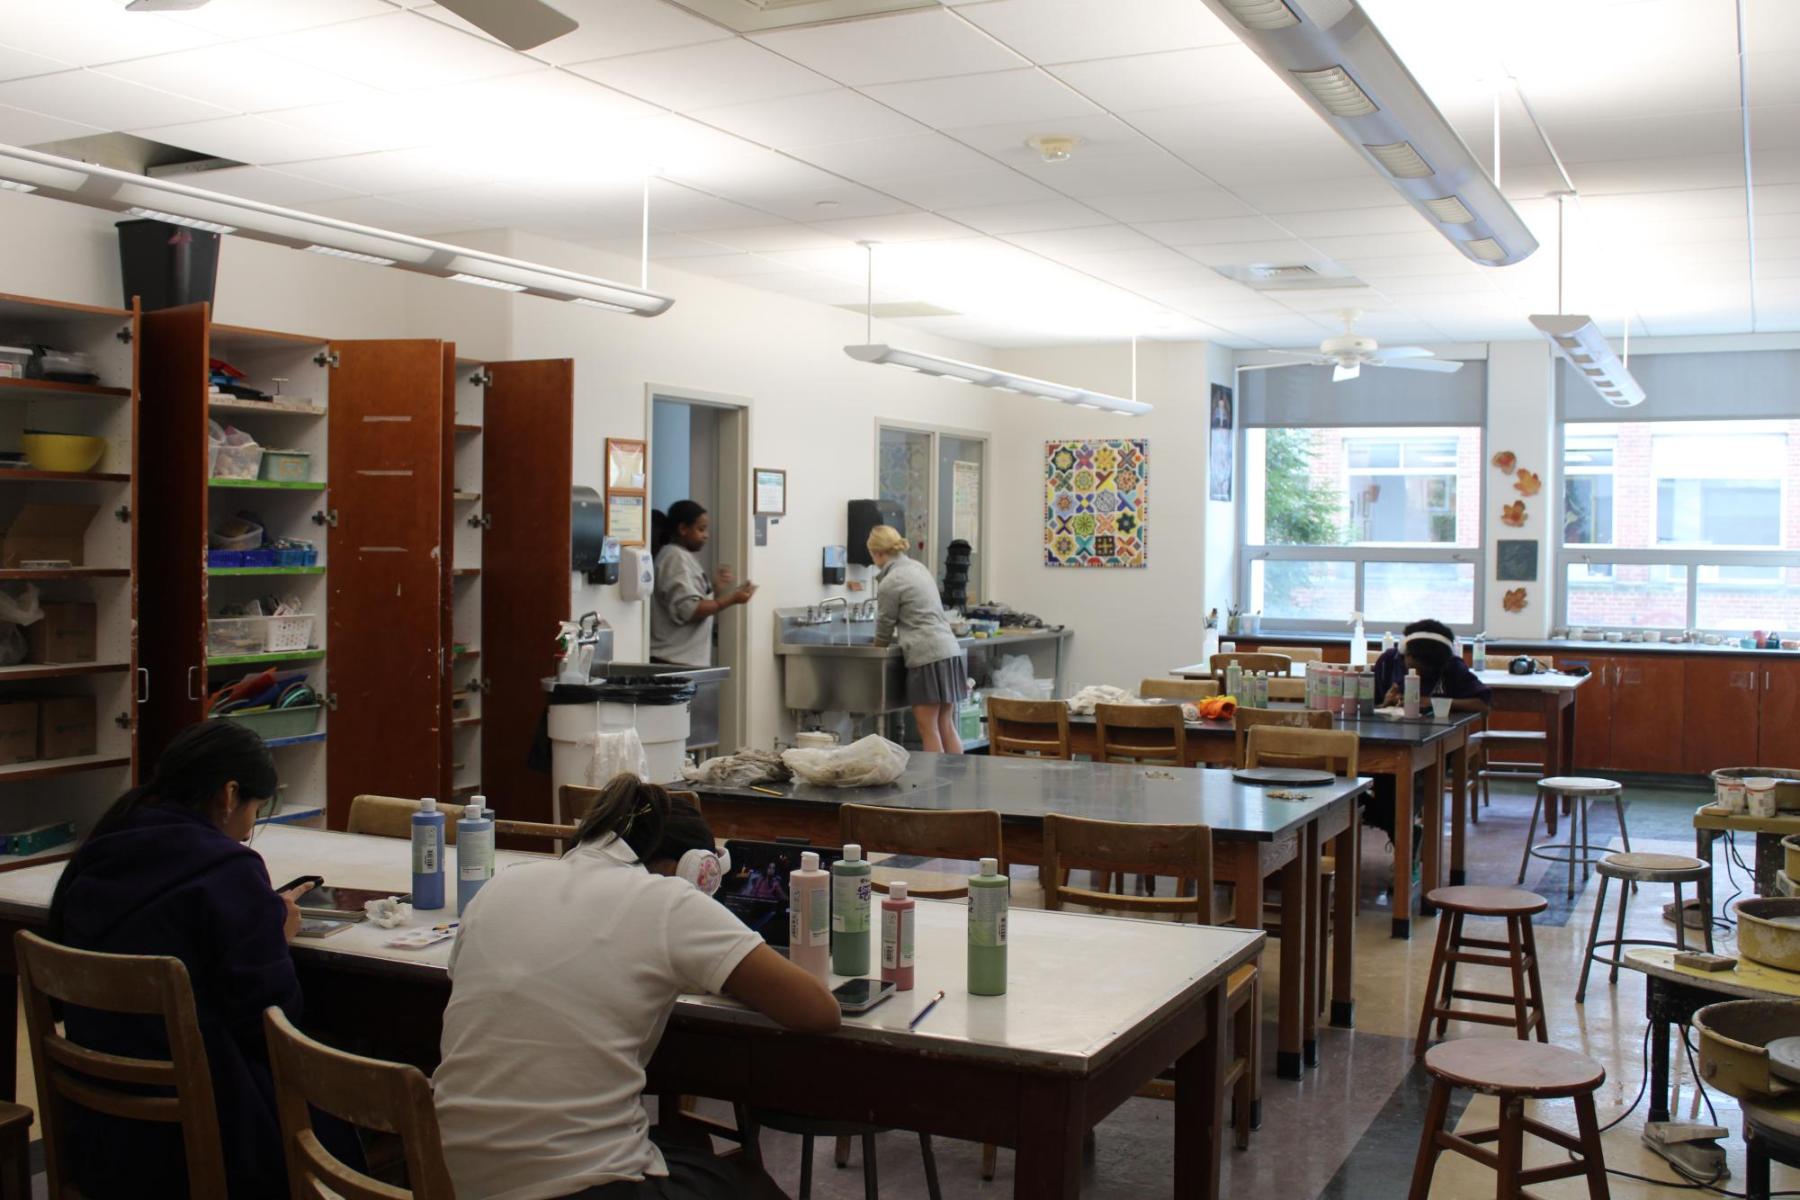 Students enjoy the ceramics room where they indulge in the creative atmosphere